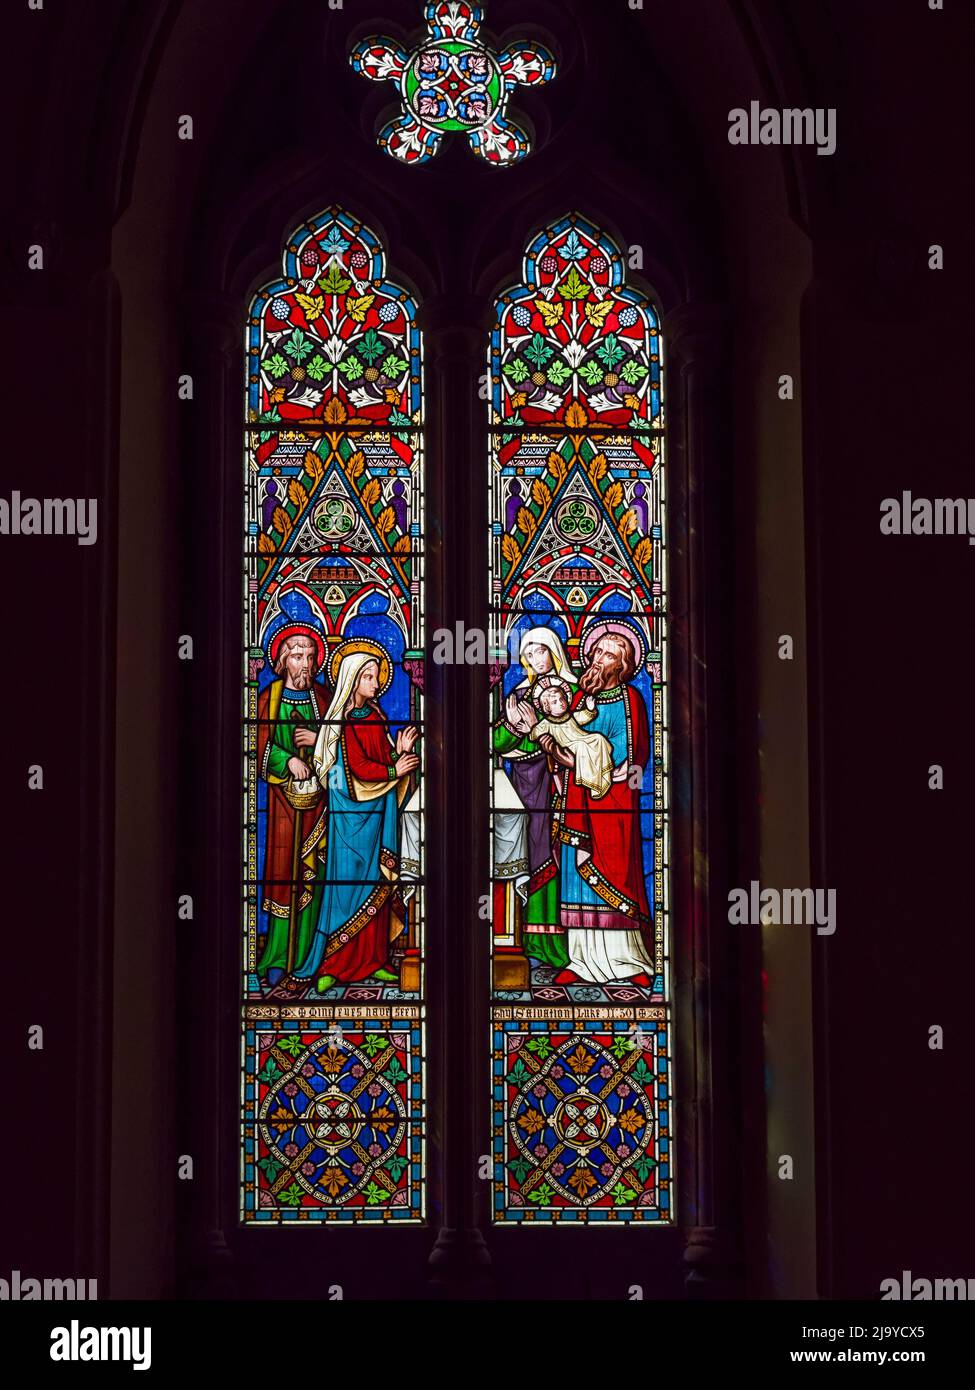 St John the Evangelist church in Otterburn, Northumberland, UK with stained glass windows. Stock Photo